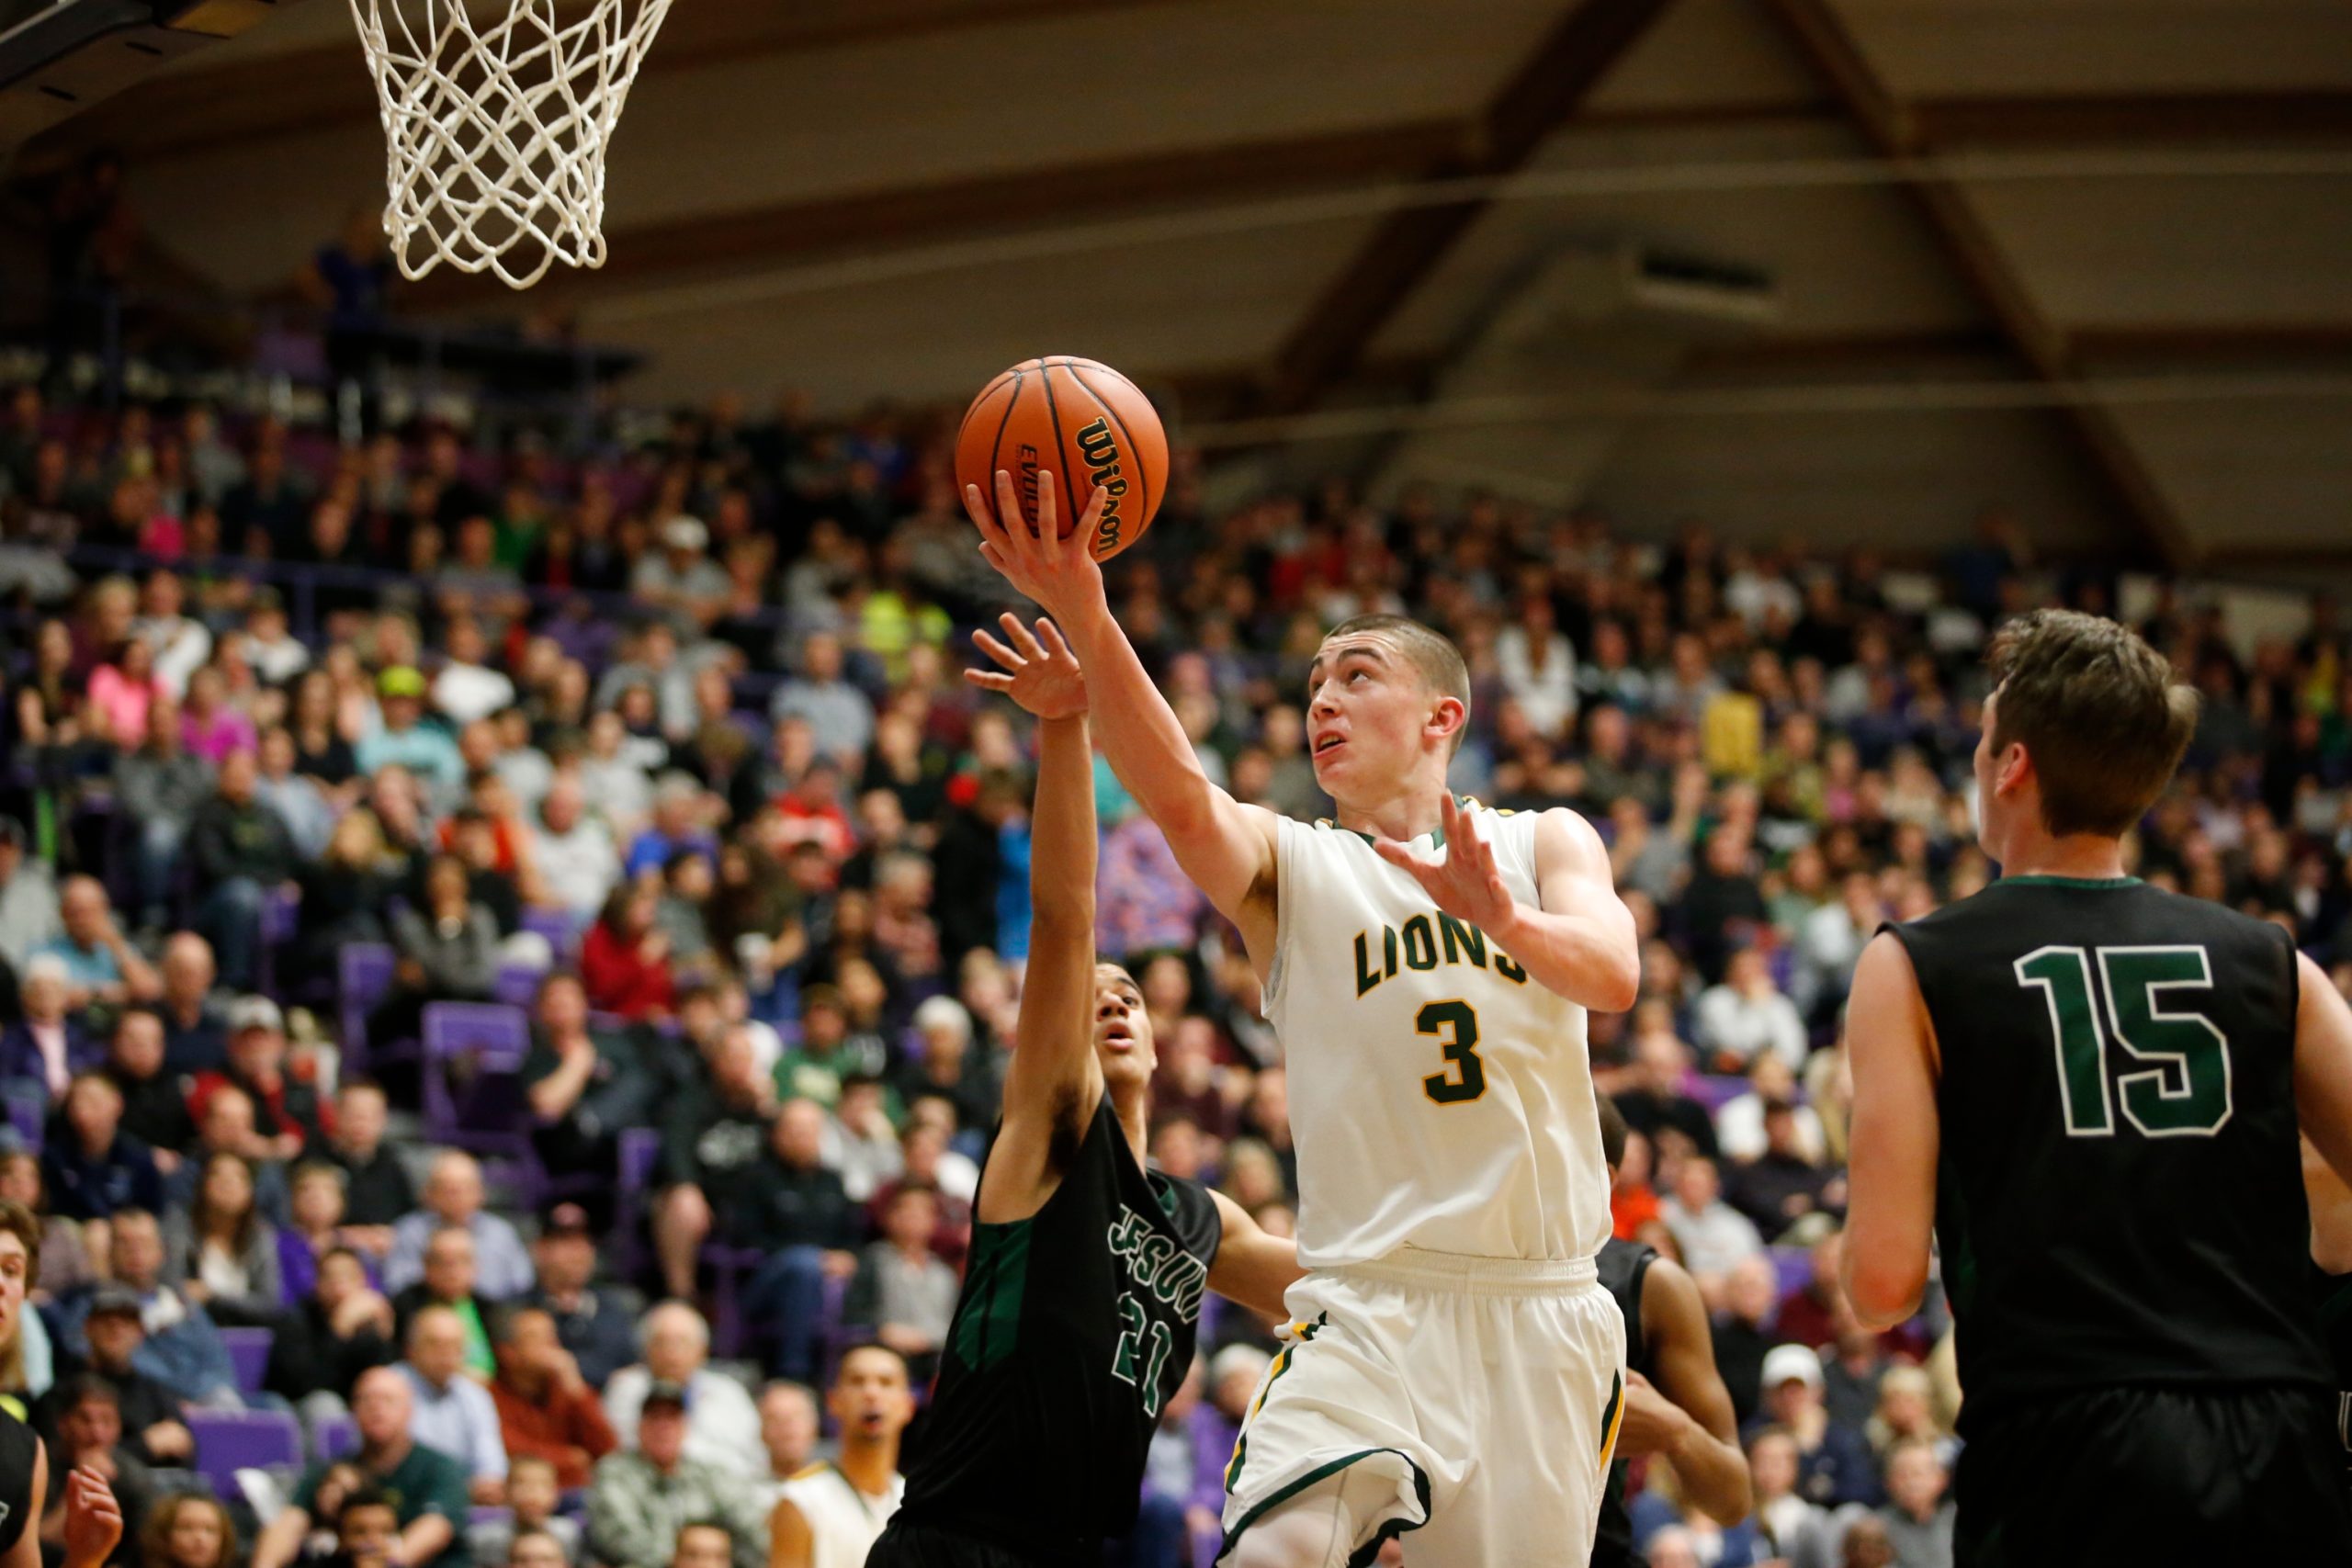 West Linn's Payton Pritchard drives on Jesuit's Malcolm Porter as Jesuit plays West Linn for the 6A Basketball State Championship at the Chiles Center in Portland, Ore. on Saturday, March 14, 2015. 